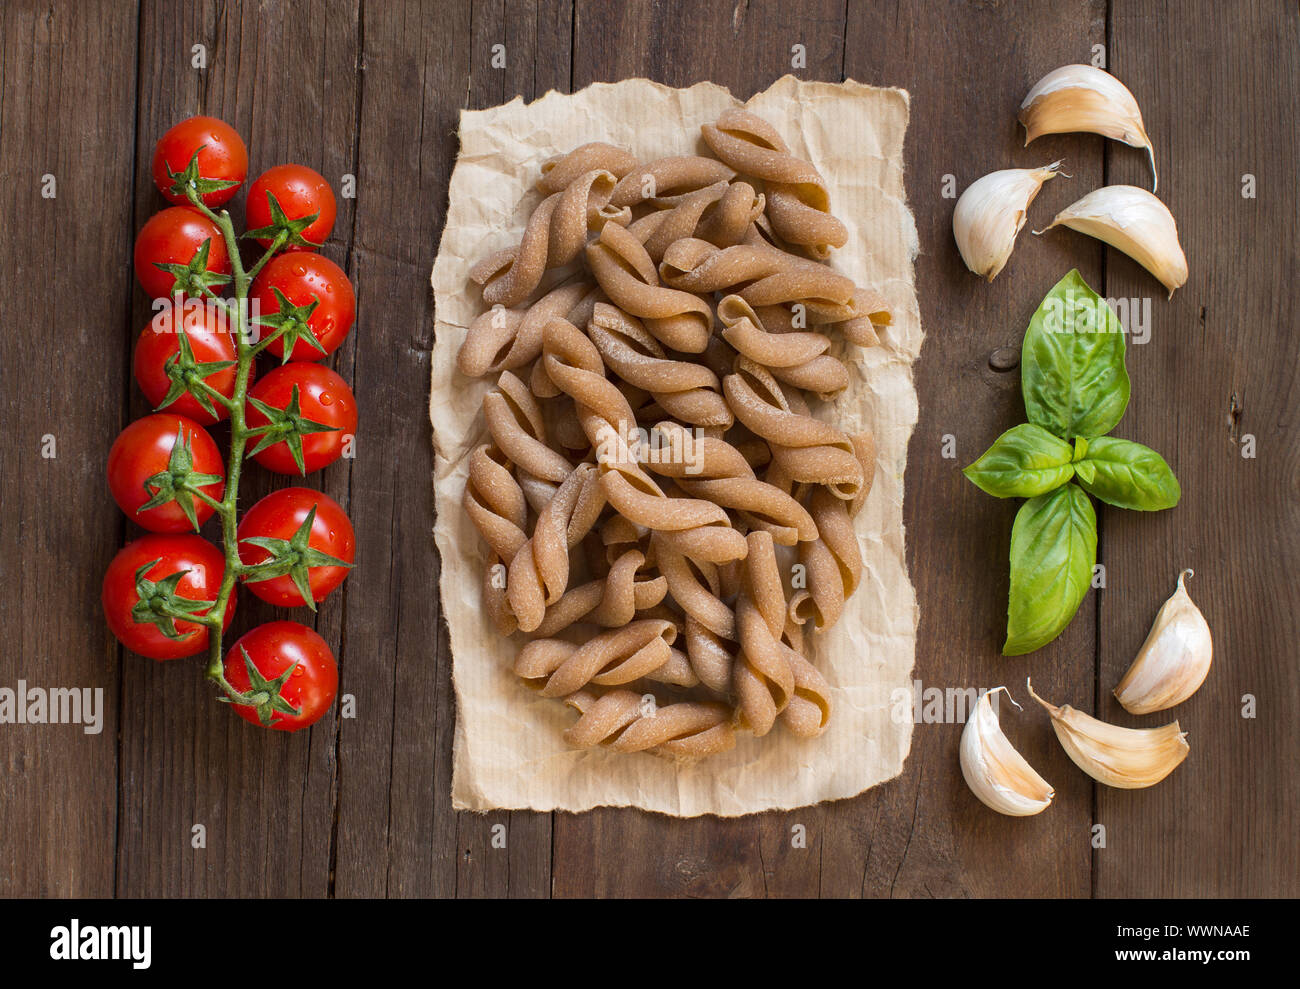 Whole wheat pasta, tomatoes and basil on wooden background Stock Photo